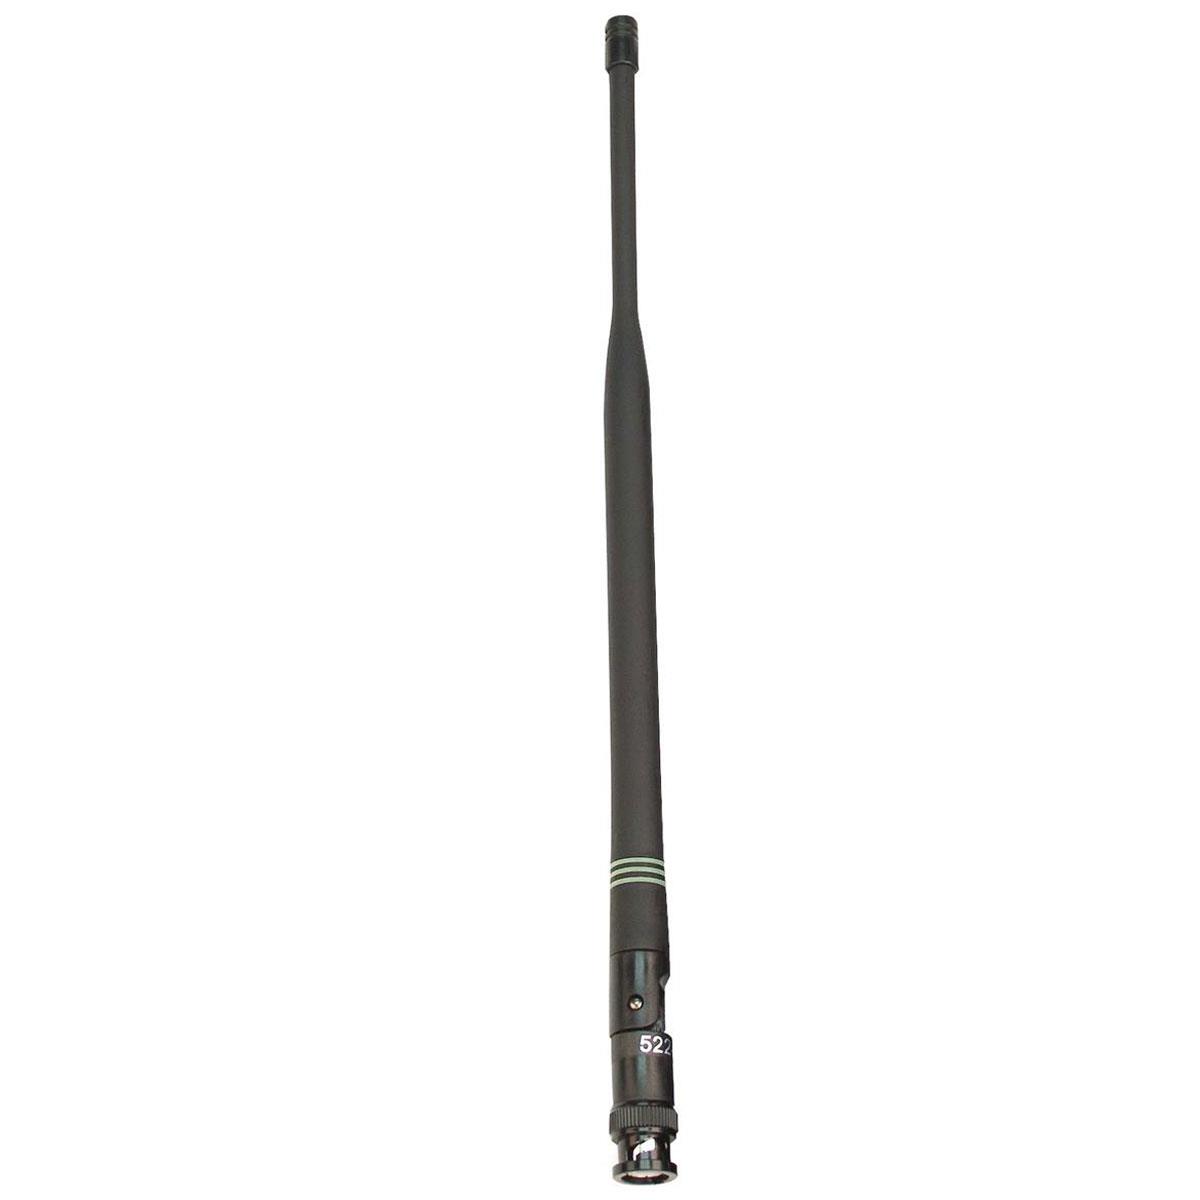 Image of Audix Antenna for ADS48 Antenna Distribution System (522-586MHz)